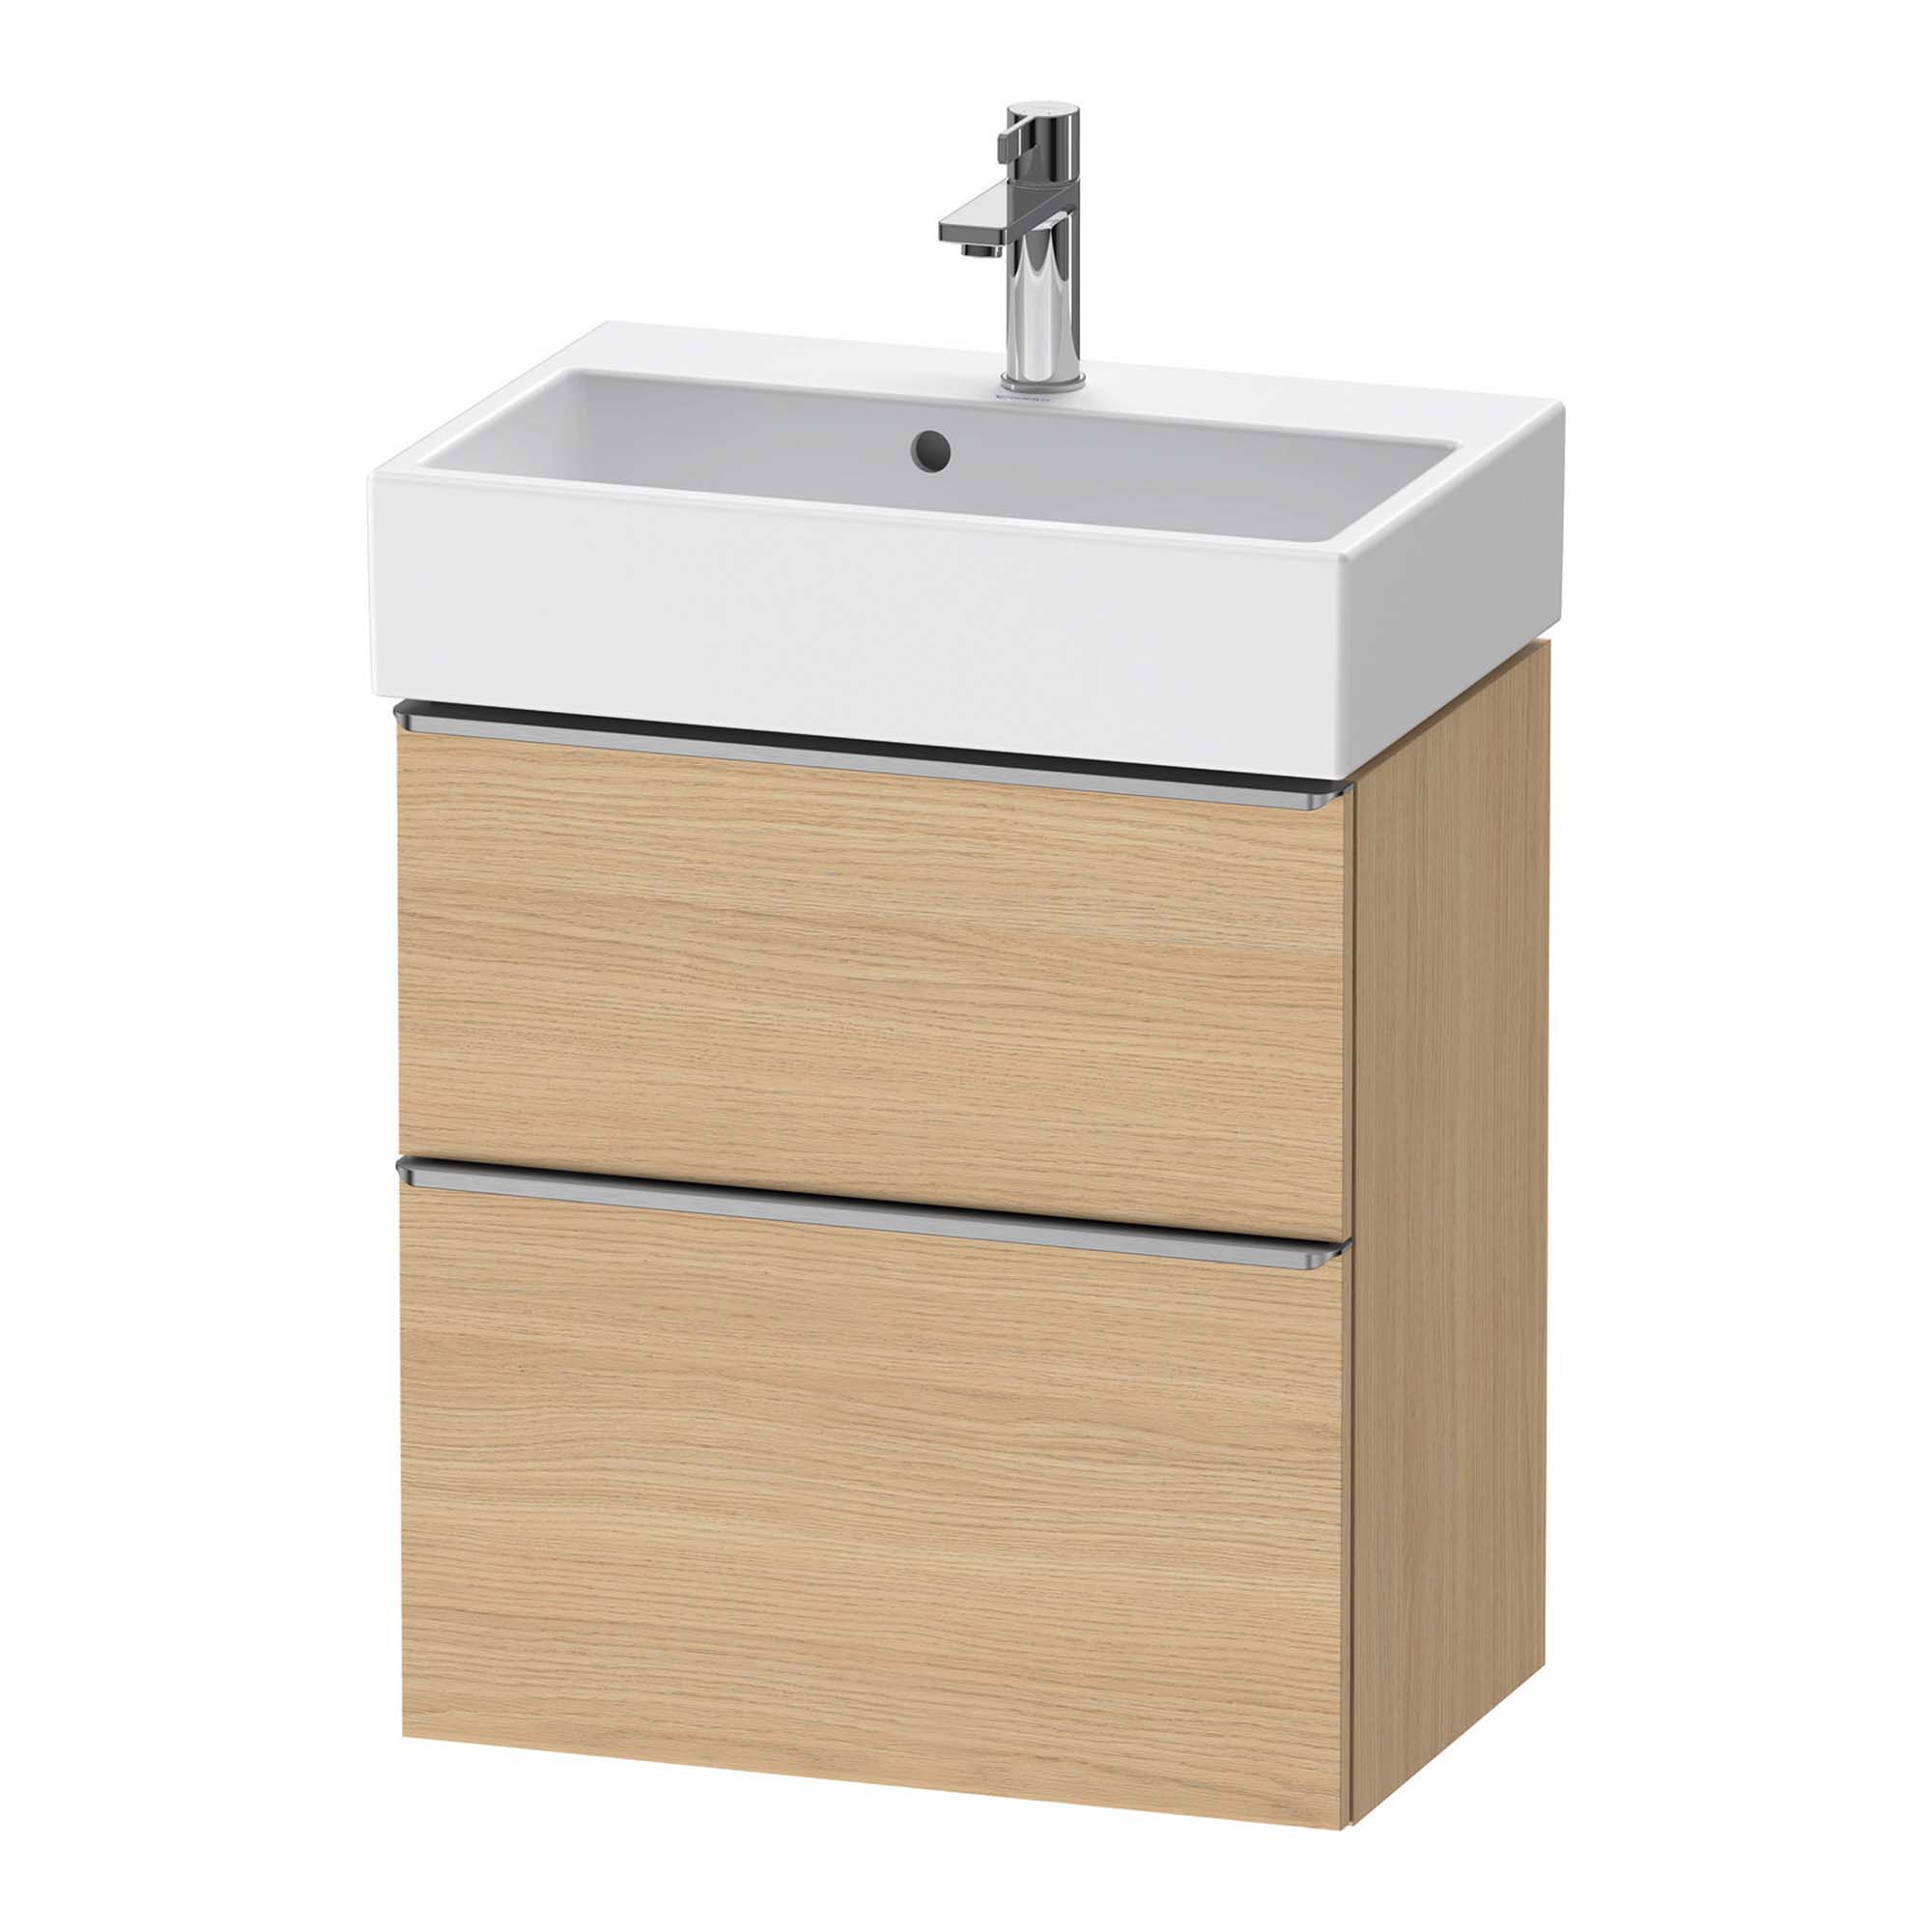 duravit d-neo 600 wall mounted vanity unit with vero basin natural oak stainless steel handles